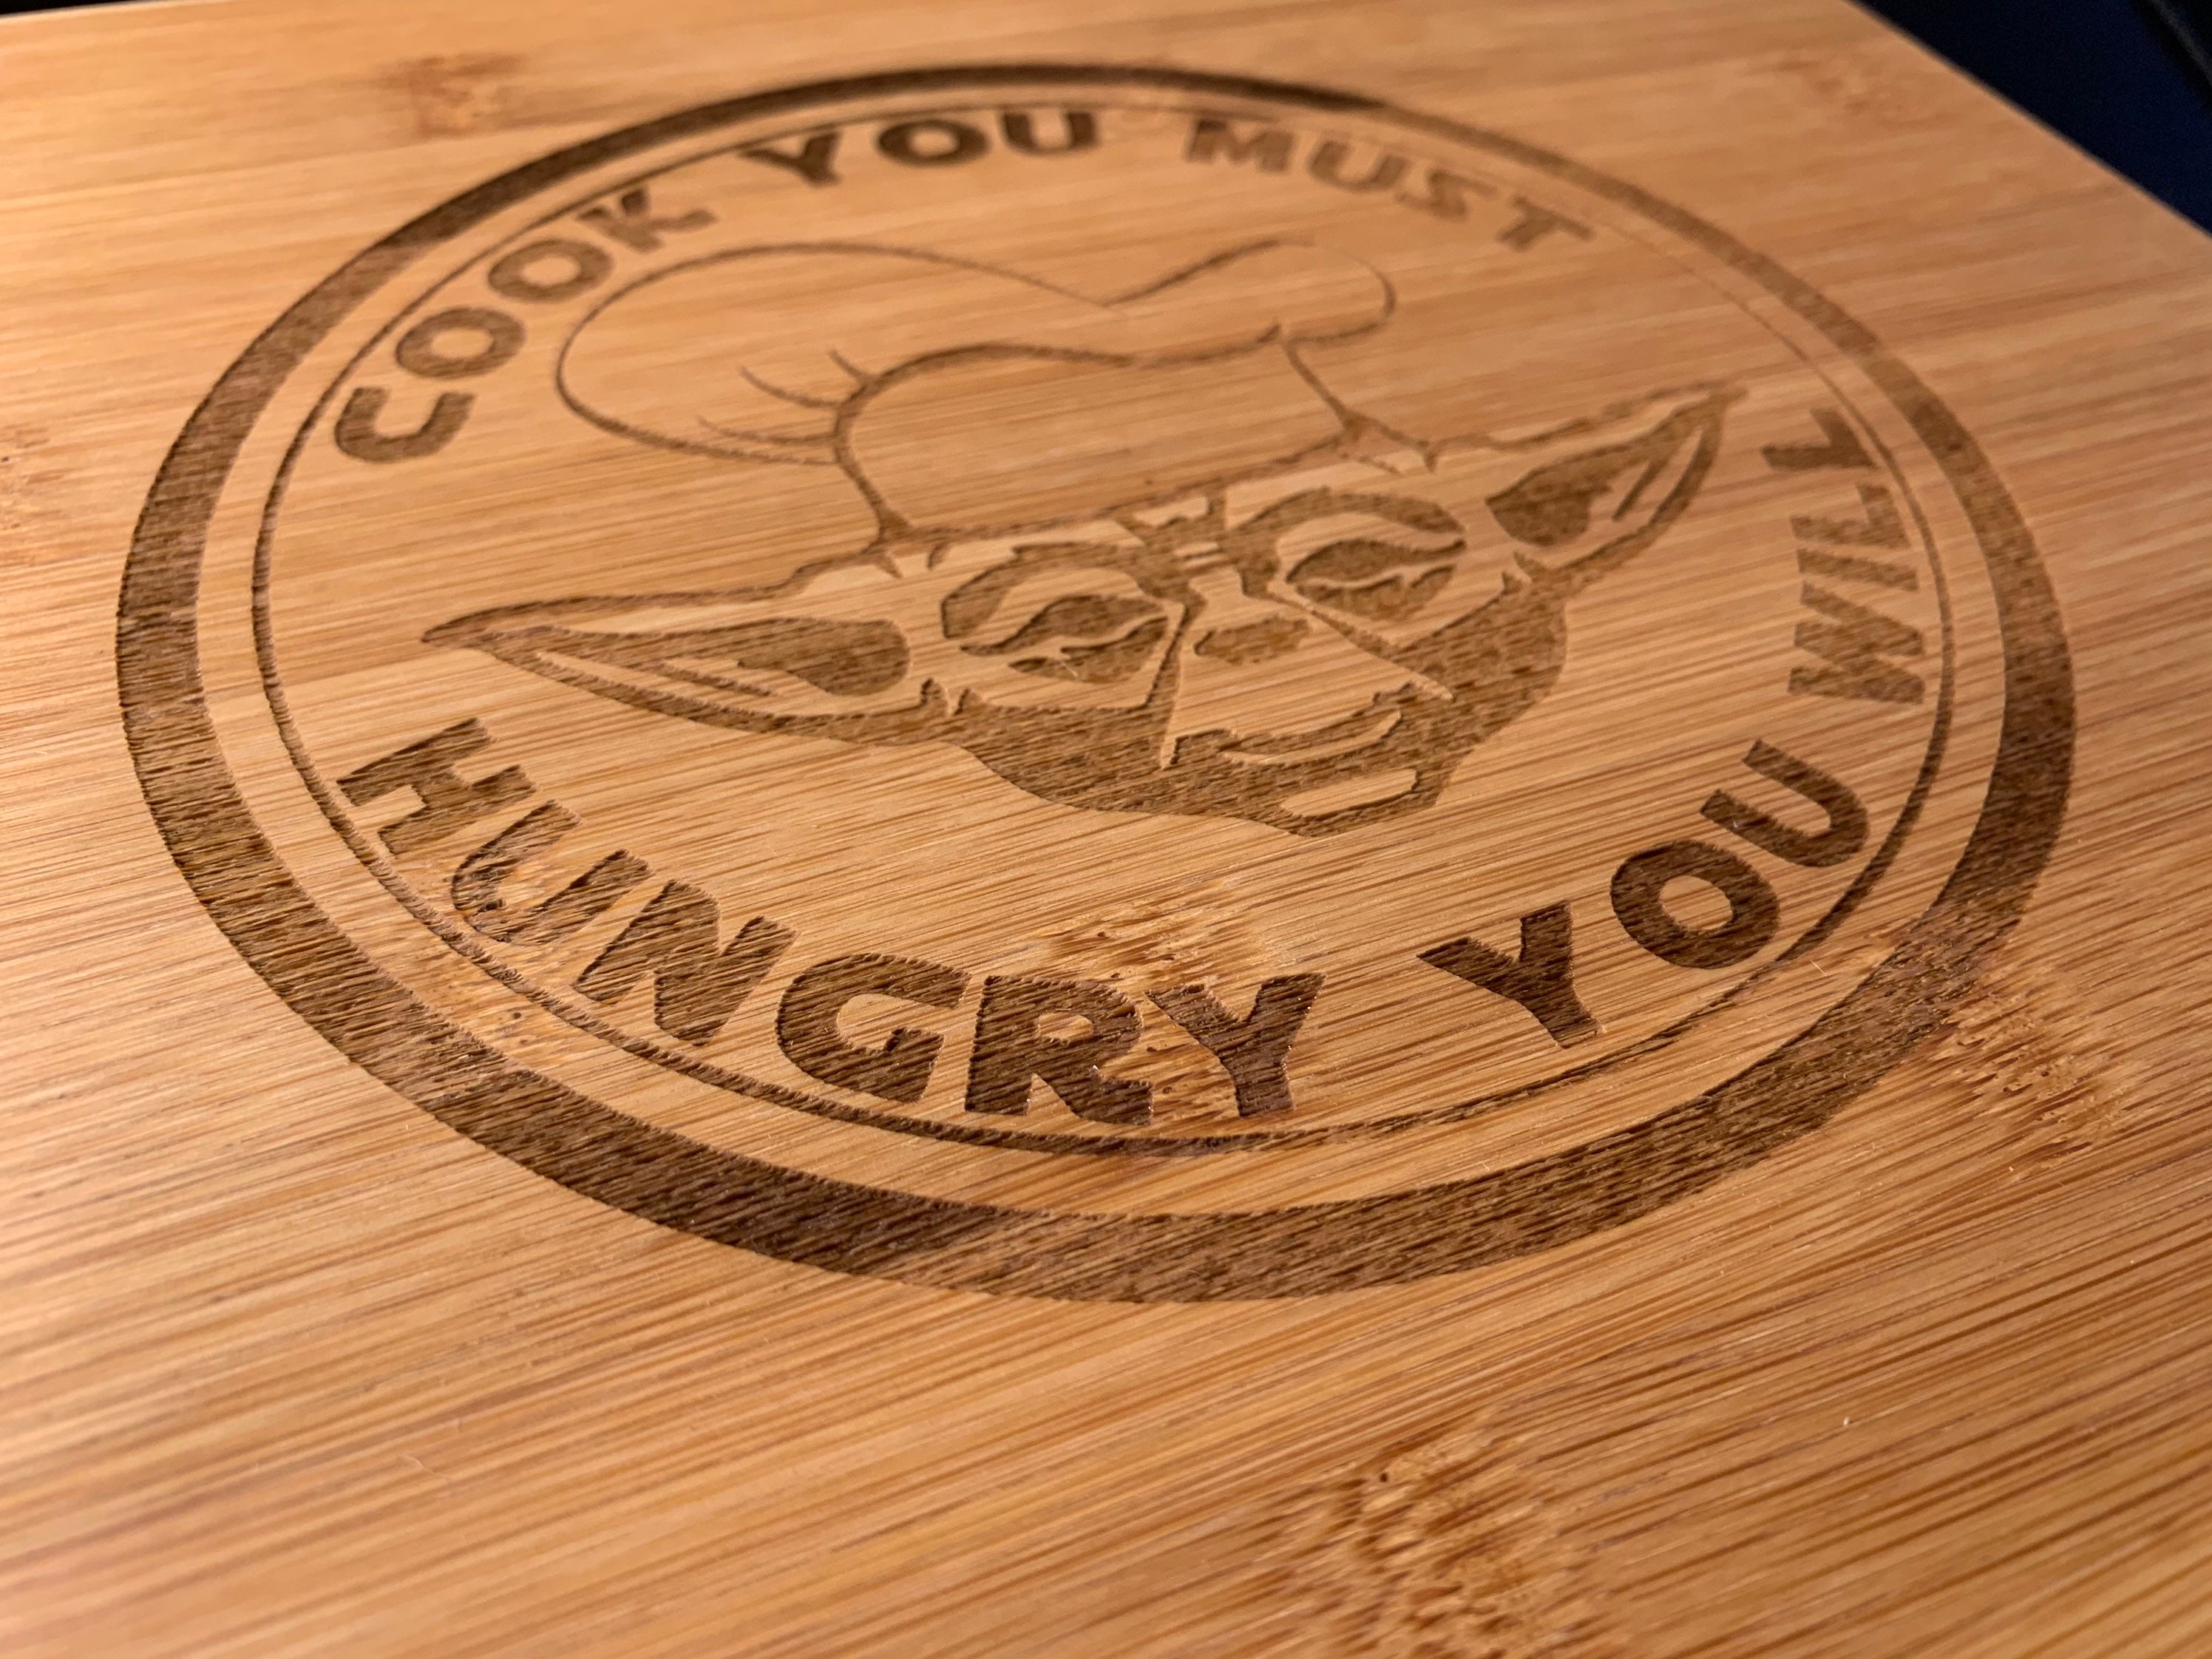 Yoda Cook You Must Engraved Bamboo Wood Cutting Board with Handle Star Wars  Foodie Gift